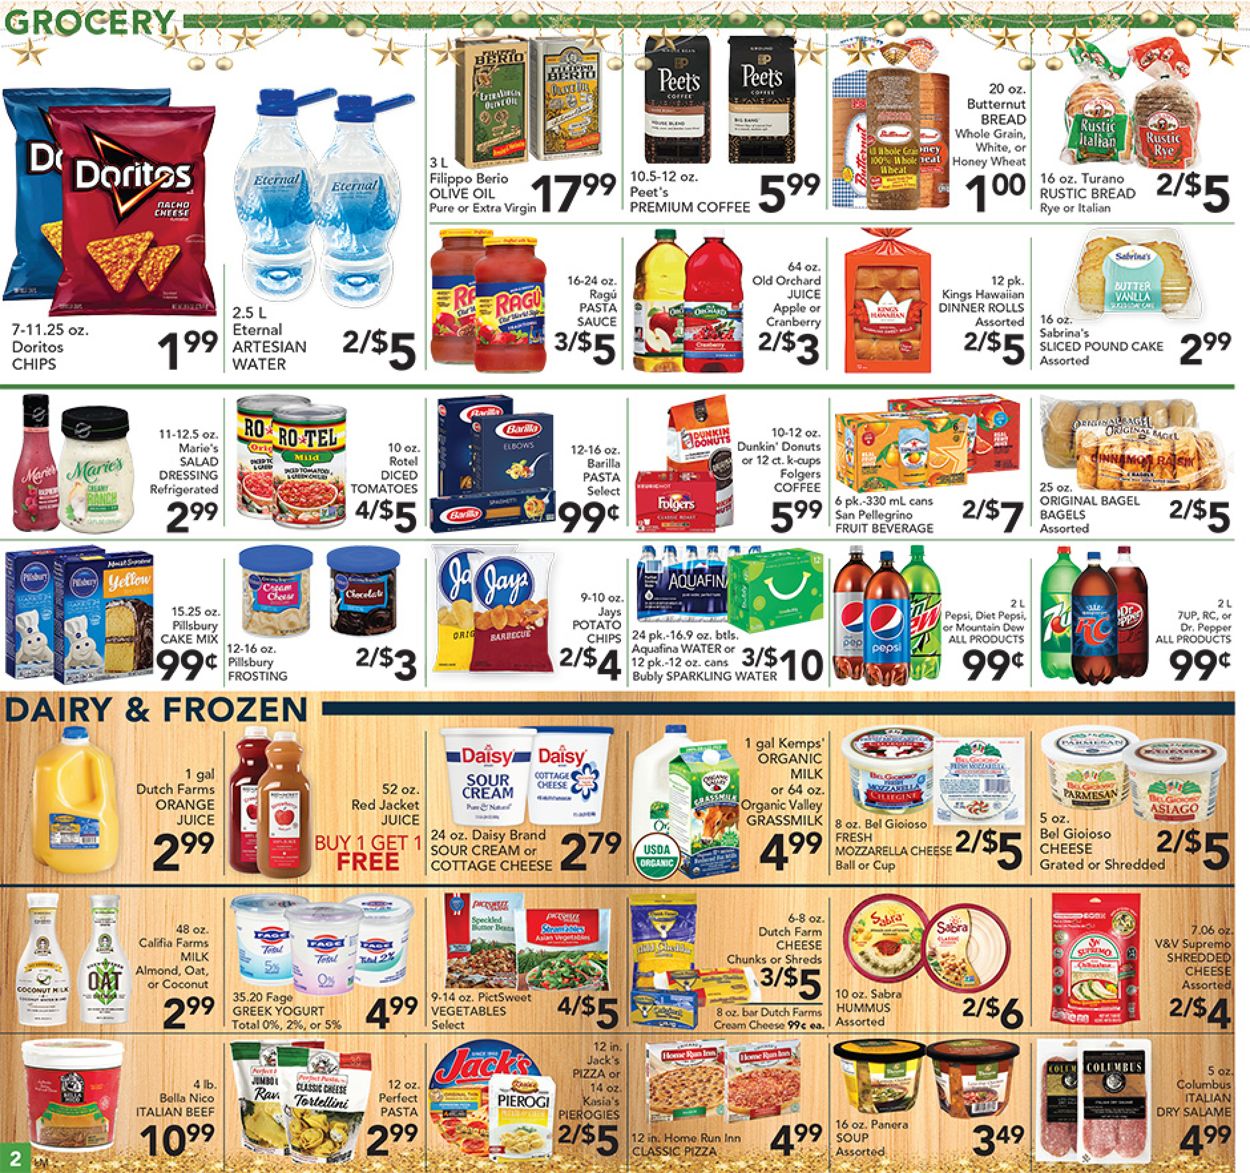 Pete's Fresh Market - New Year's Ad 2019/2020 Weekly Ad Circular - valid 12/26-12/31/2019 (Page 2)